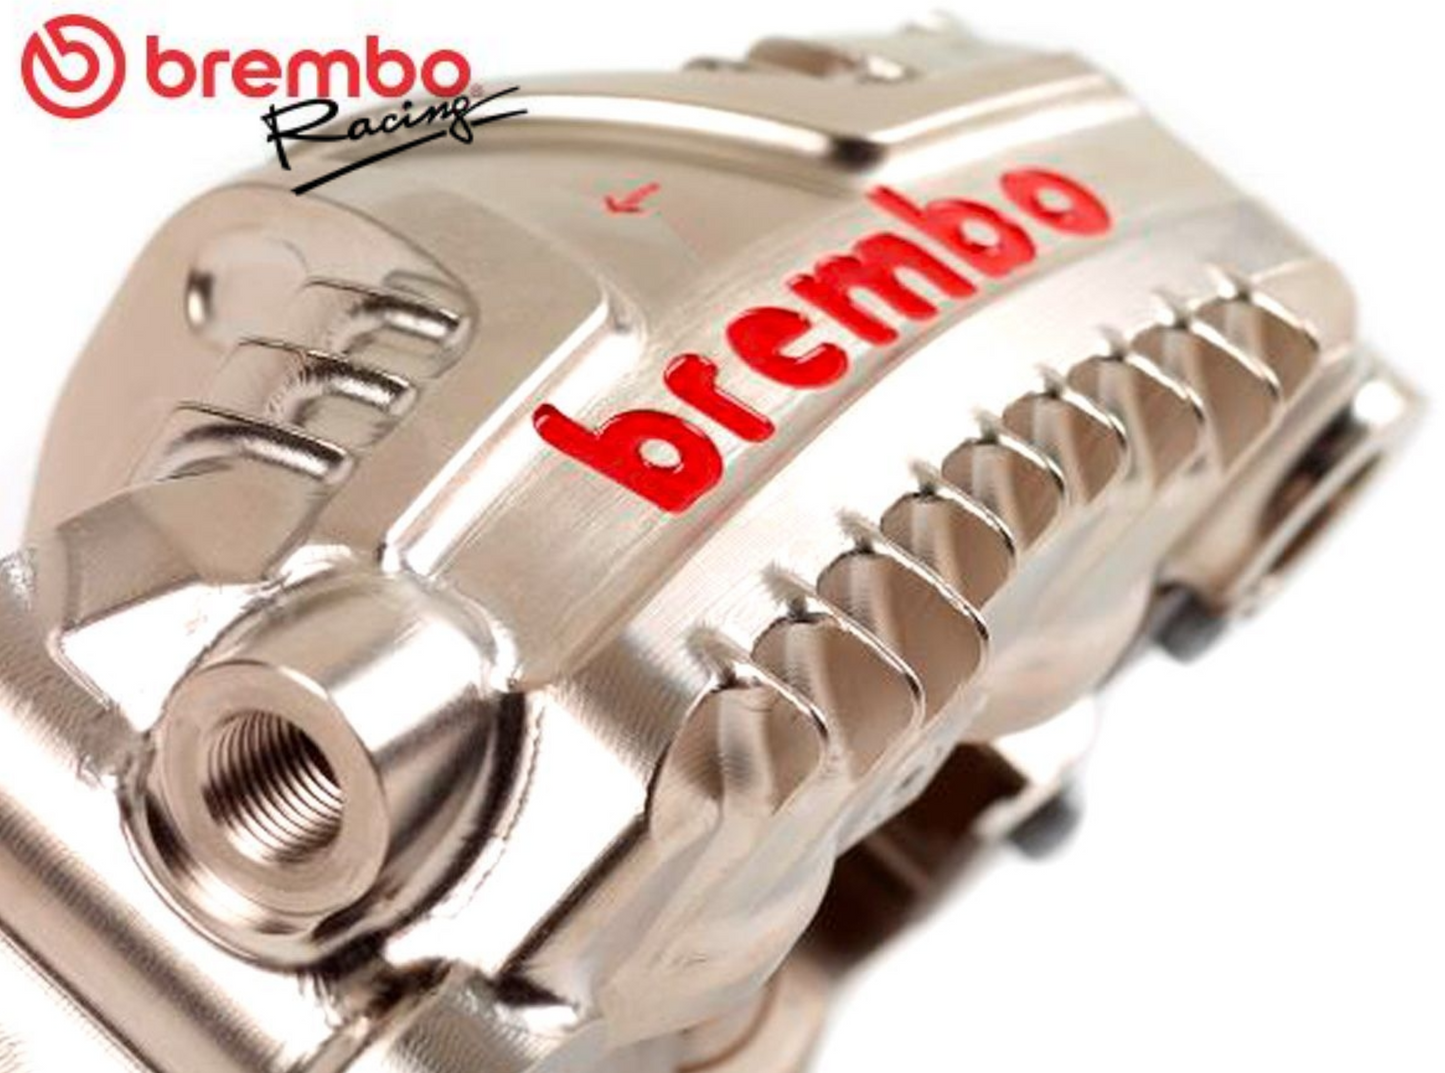 5/7 Italy in stock Brembo GP4-LM Endurance Radial Monoblock CNC Caliper Nickel Coated 108mm Pitch XC1AB10 XC1AB11 Brembo Racing